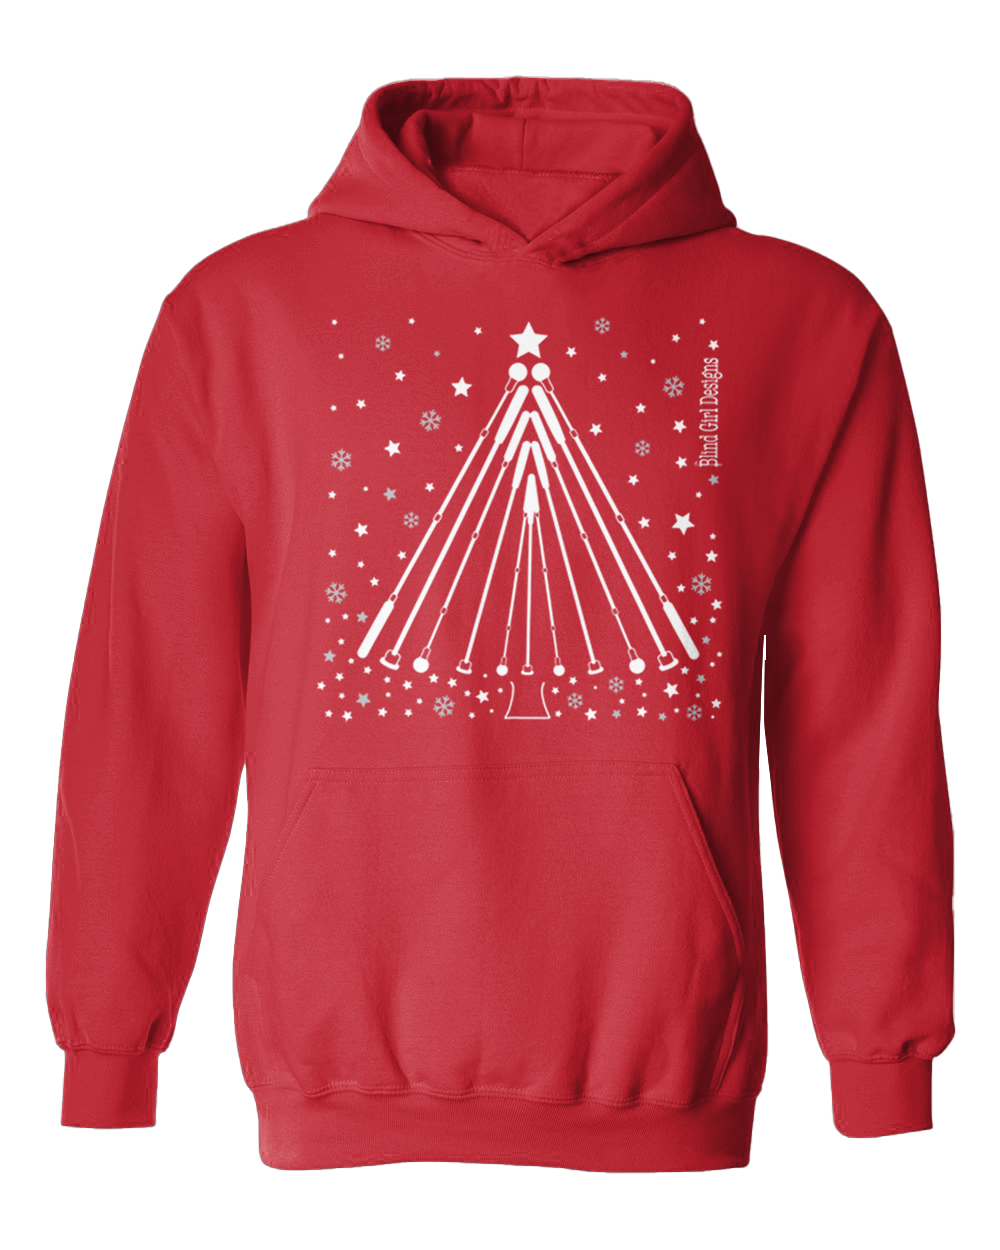 New! 3D Tactile White Cane Winter Tree Hoodie - Bright Red